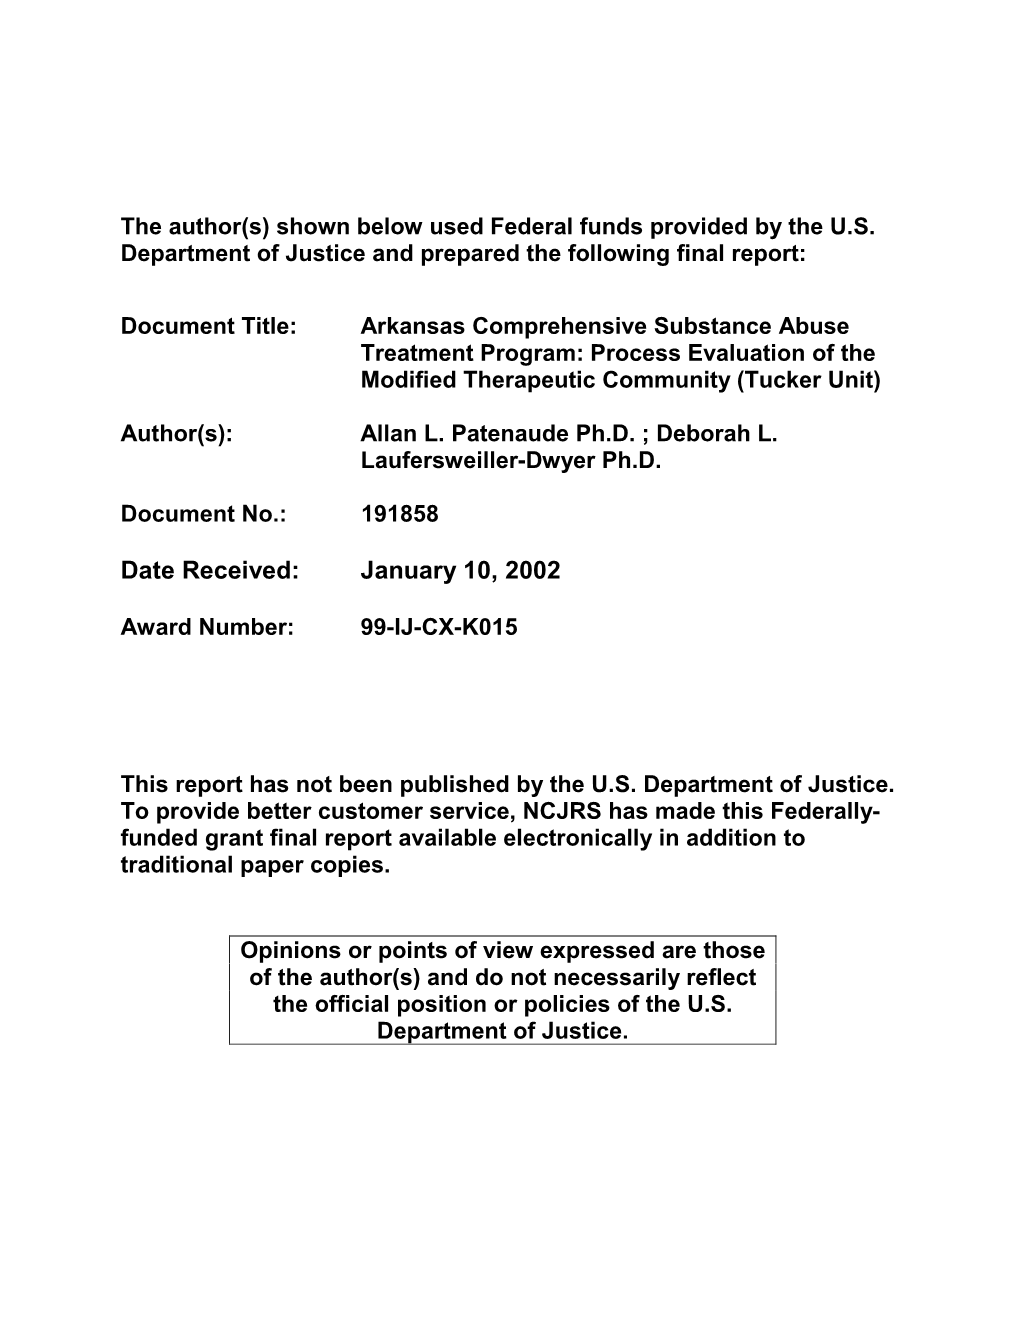 Arkansas Comprehensive Substance Abuse Treatment Program: Process Evaluation of the Modified Therapeutic Community (Tucker Unit)